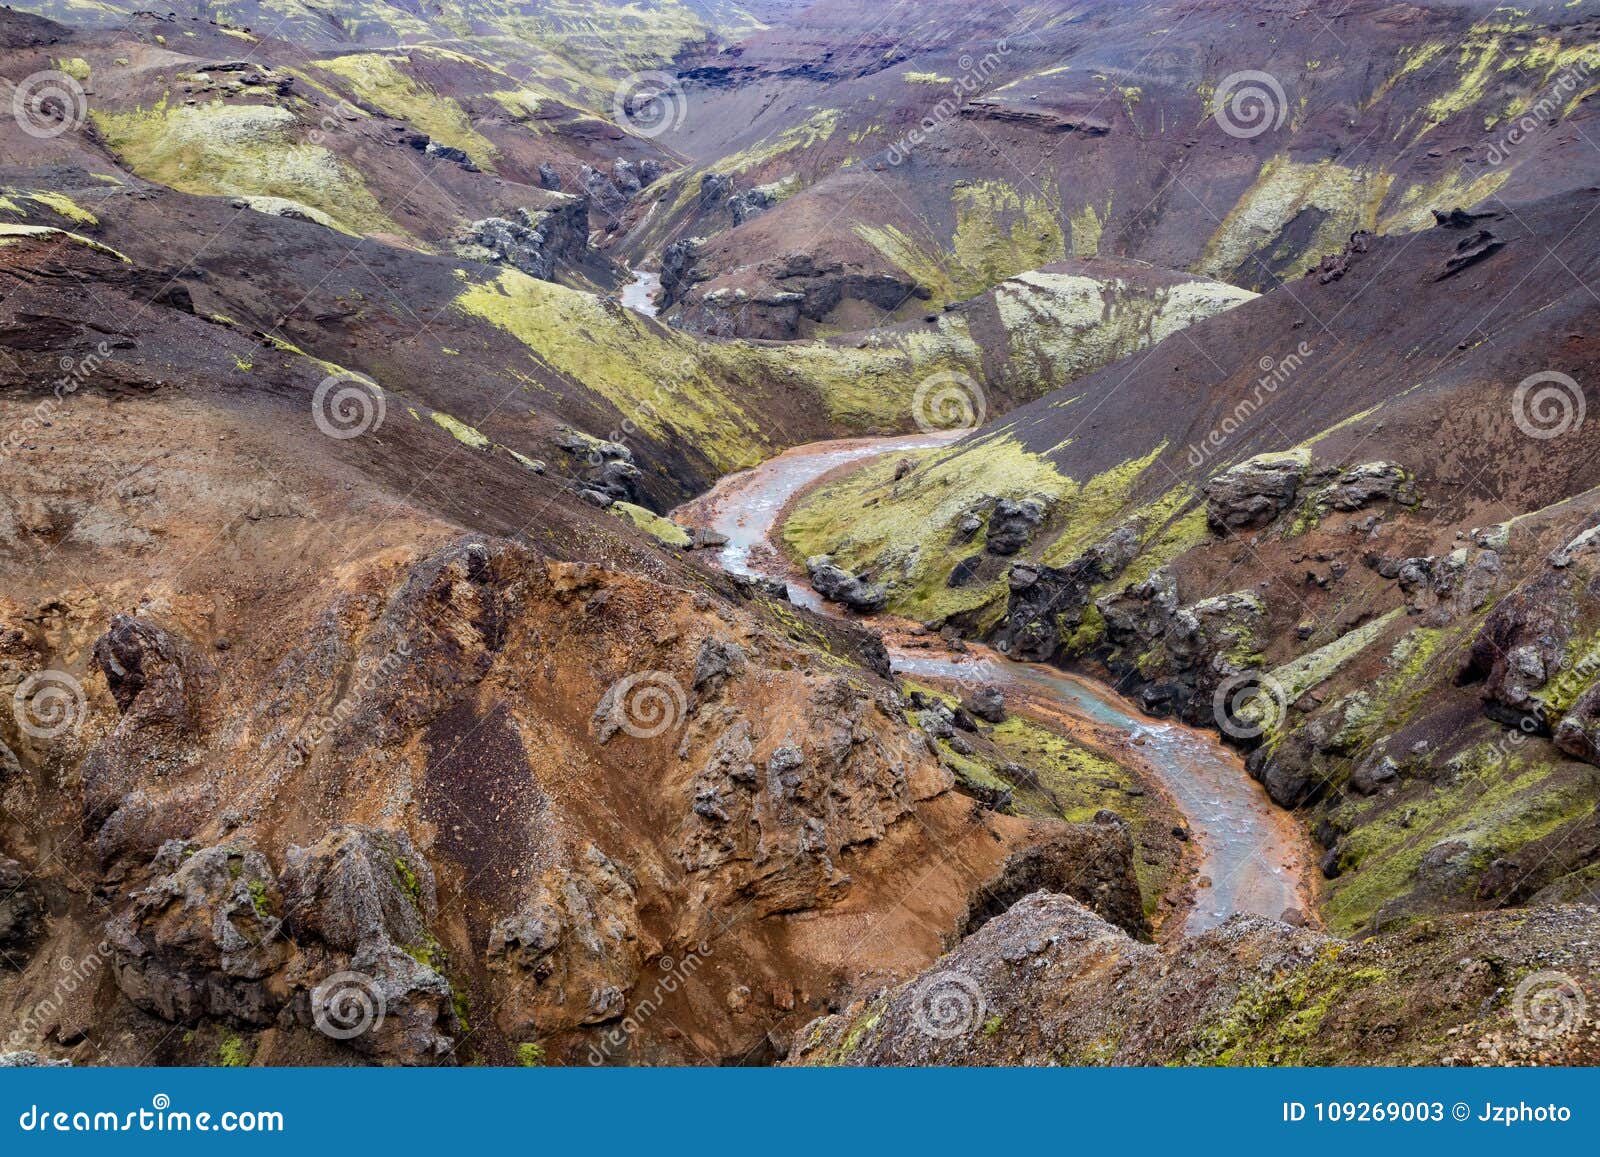 ravine and river flowing from kerlingarfjÃÂ¶ll, iceland